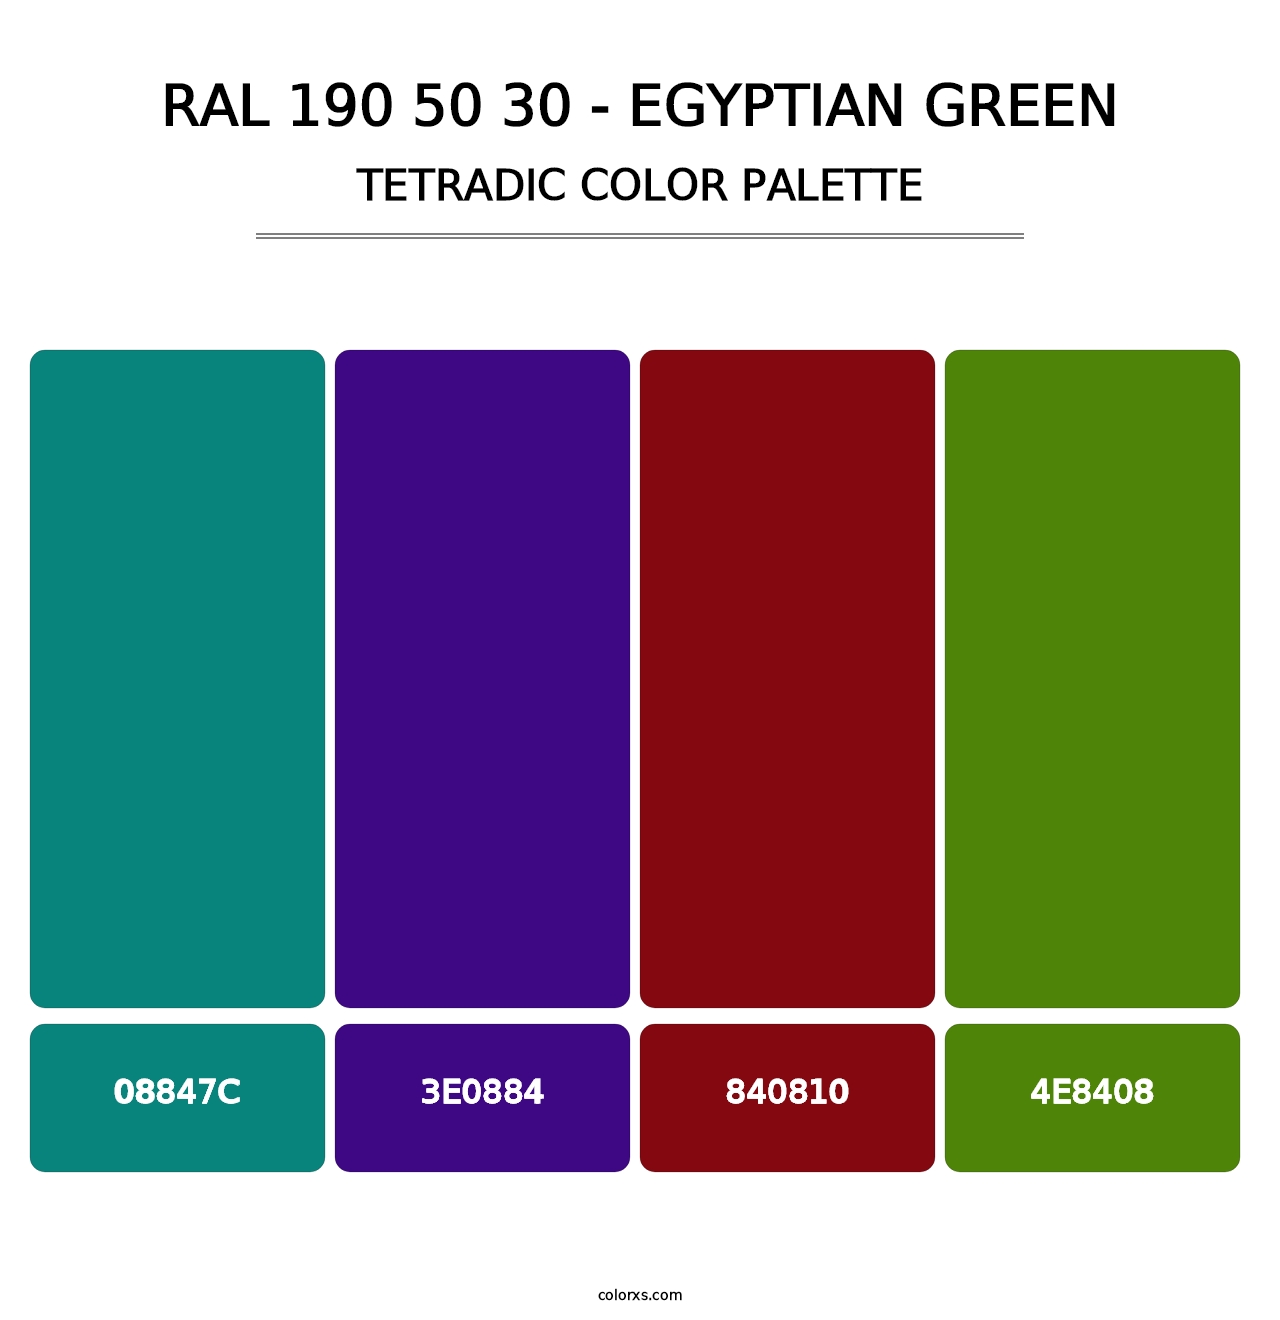 RAL 190 50 30 - Egyptian Green - Tetradic Color Palette